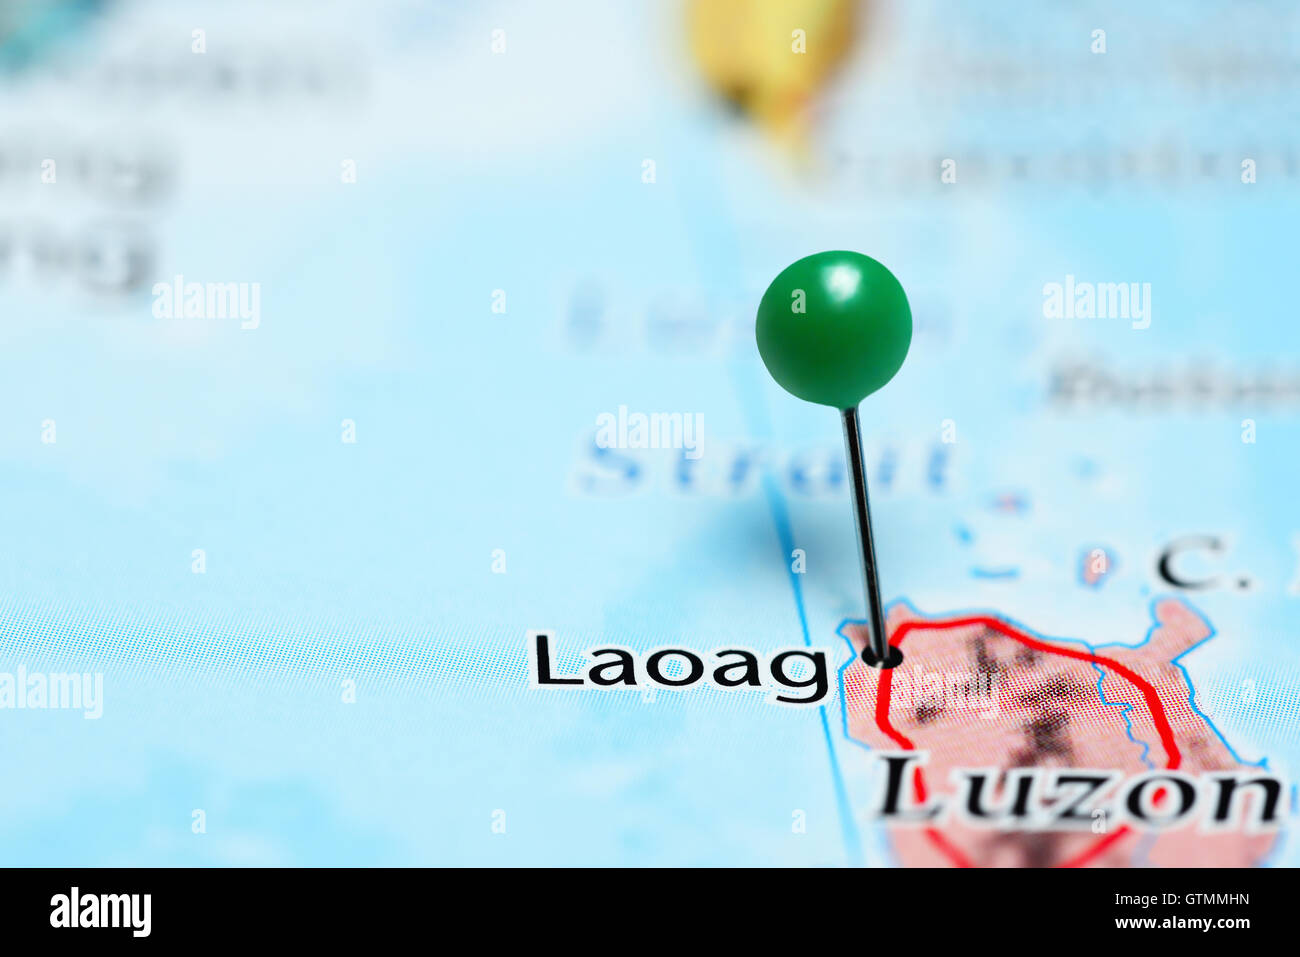 Laoag pinned on a map of Philippines Stock Photo